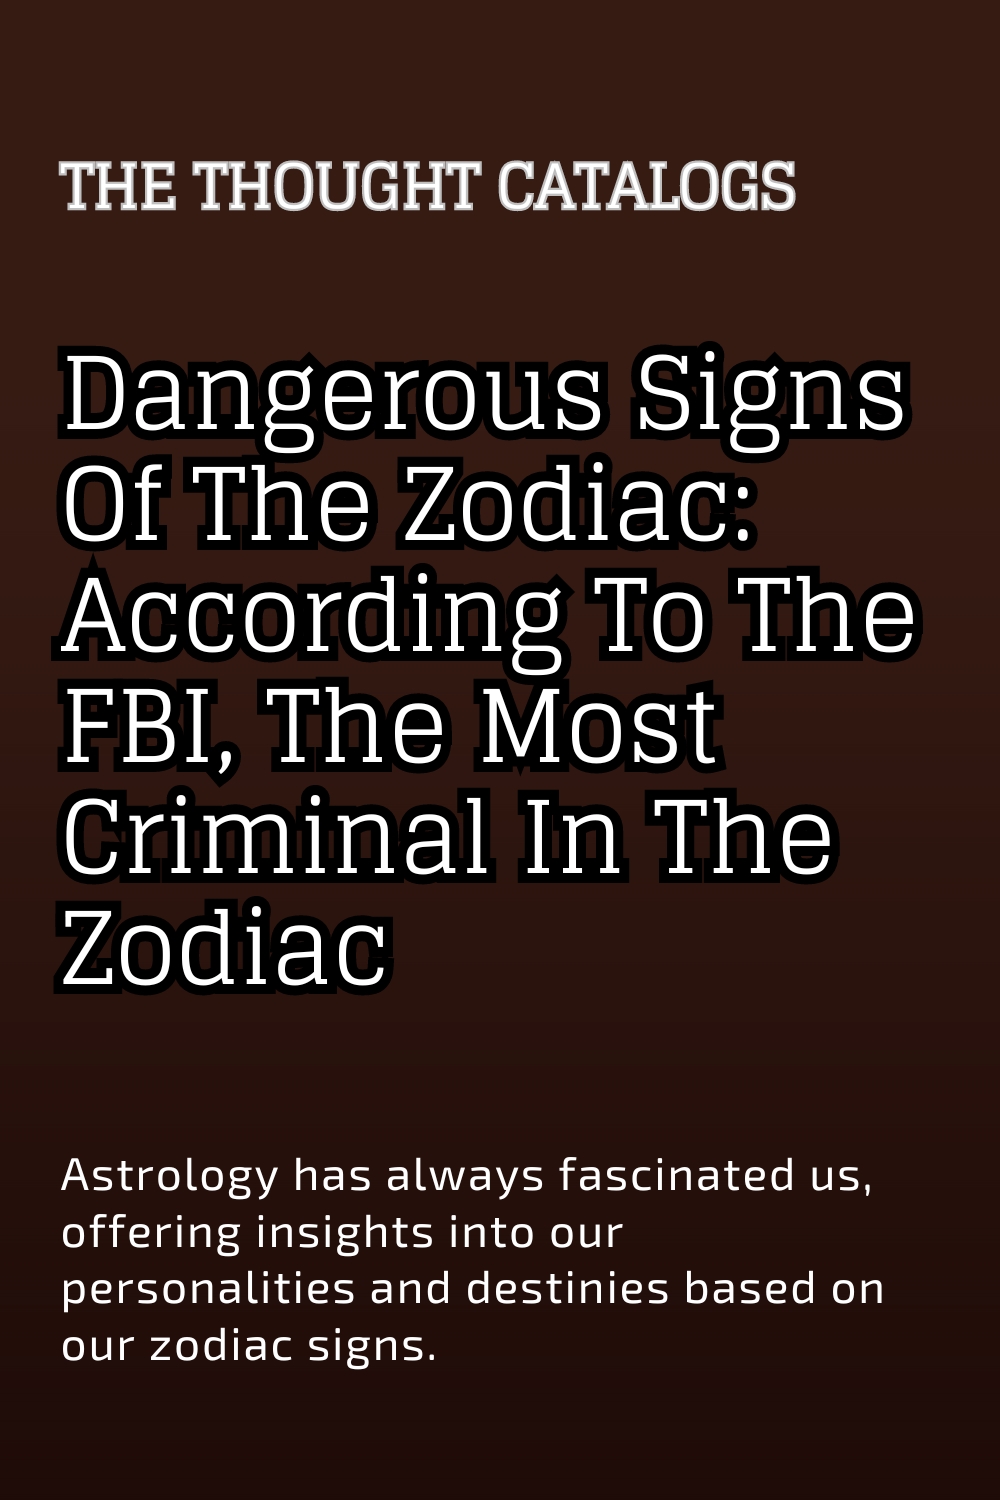 Dangerous Signs Of The Zodiac According To The FBI, The Most Criminal In The Zodiac